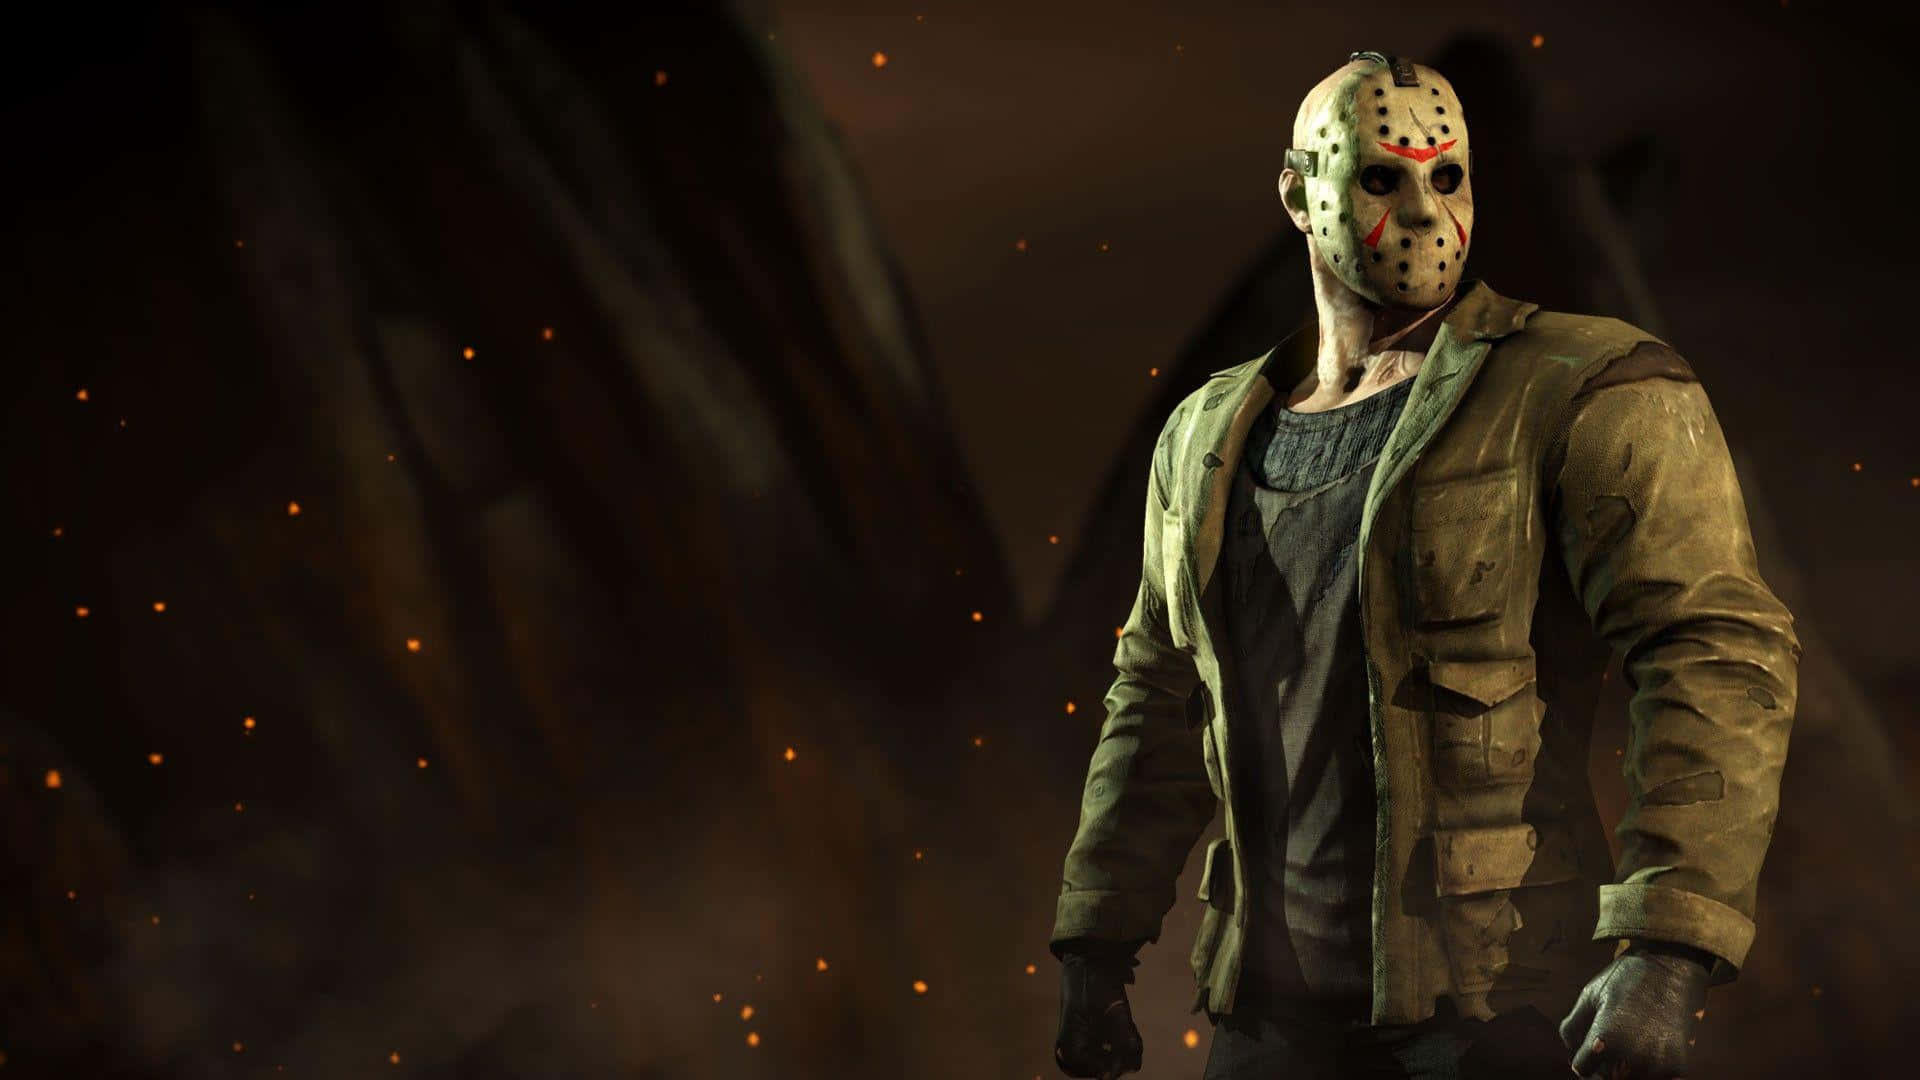 "Jason Voorhees, Icon of Horror Movies"